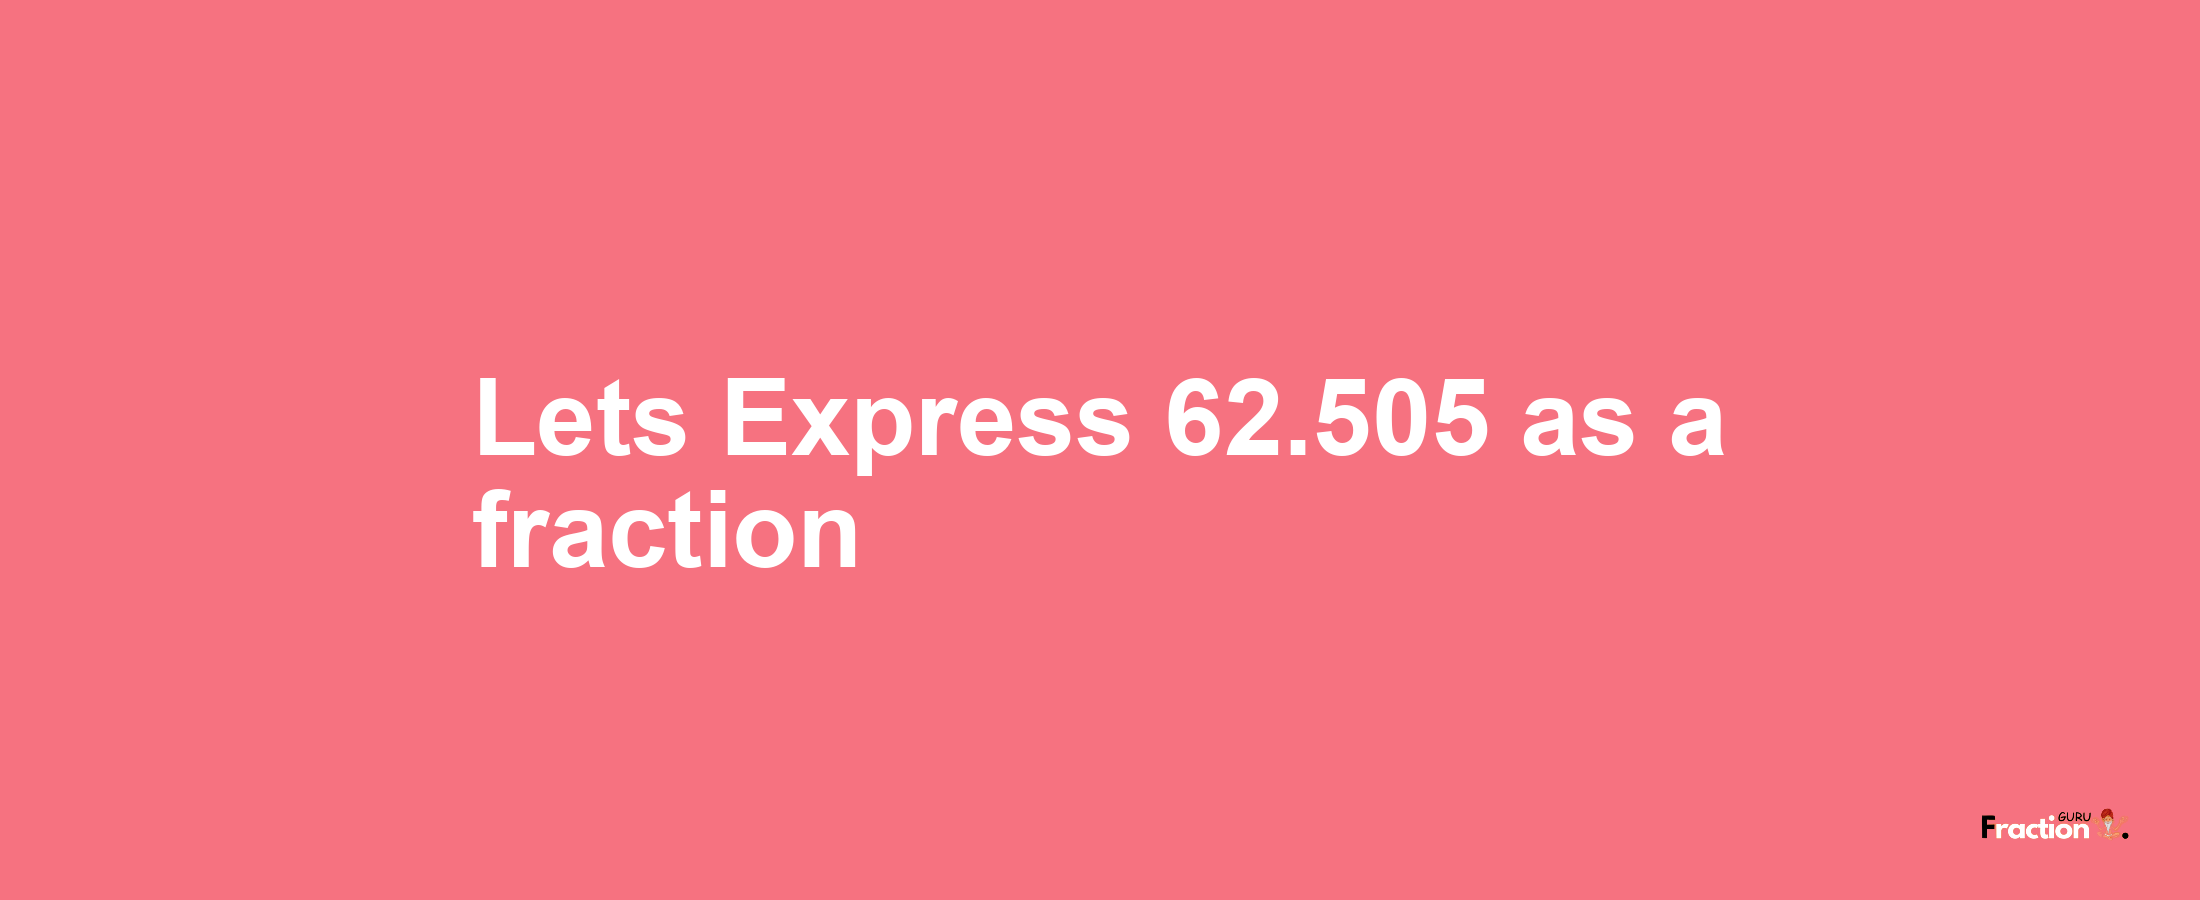 Lets Express 62.505 as afraction